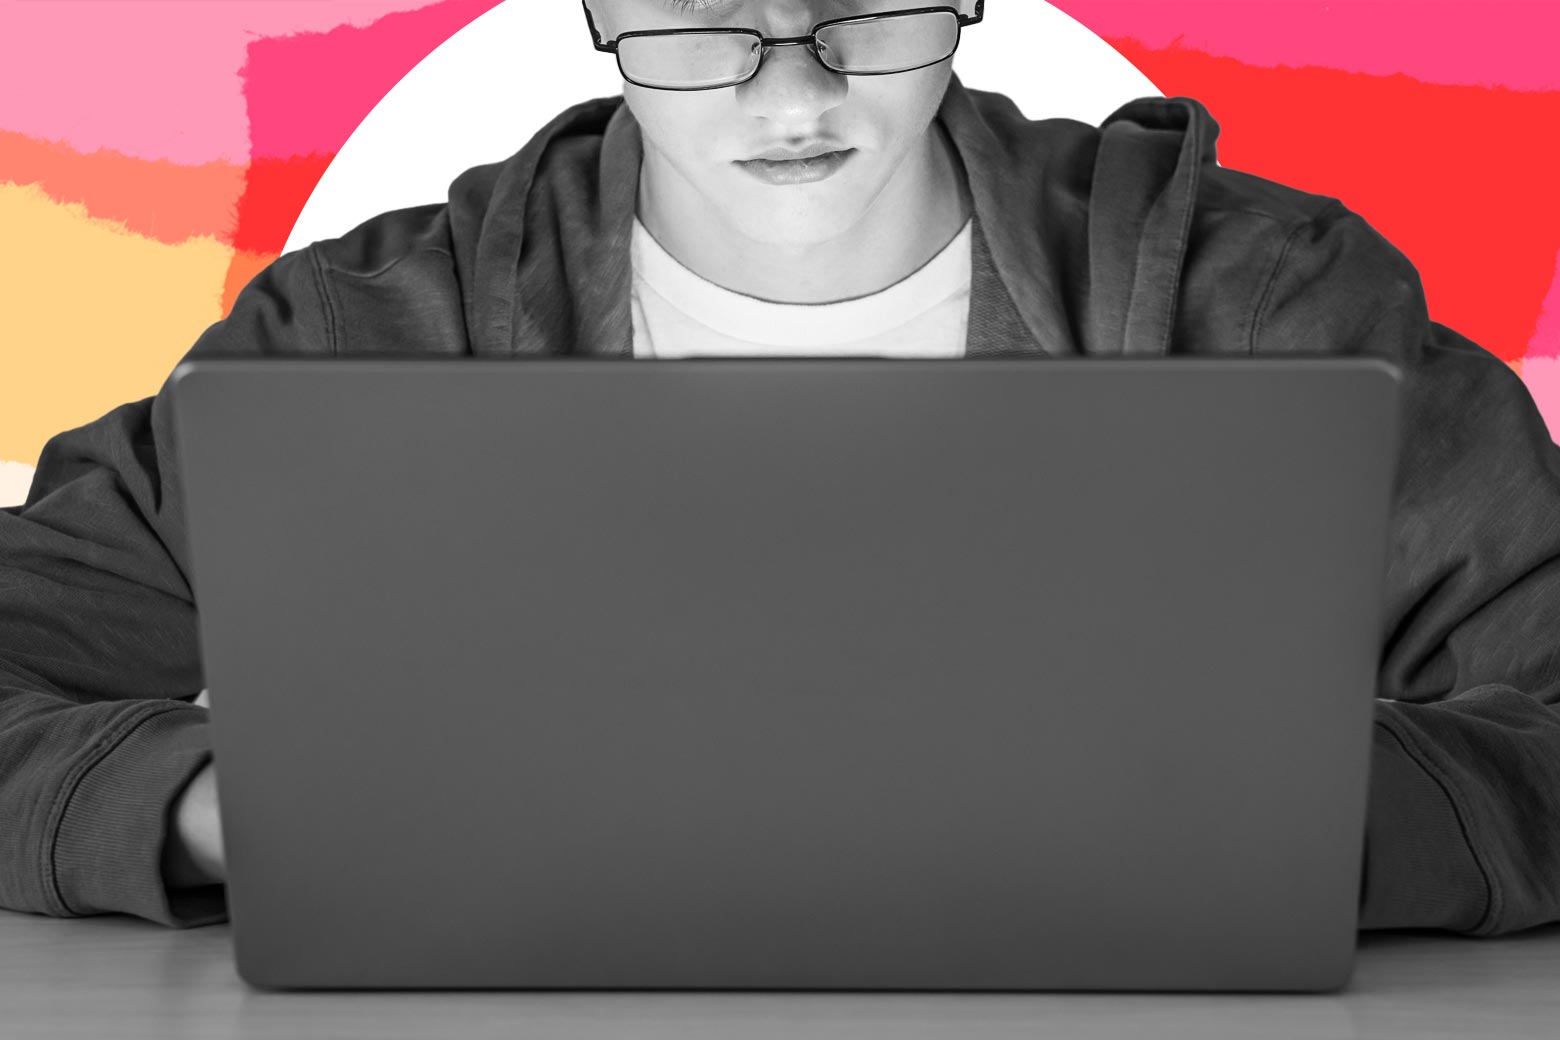 A young adult on a laptop in front of an illustrated background.